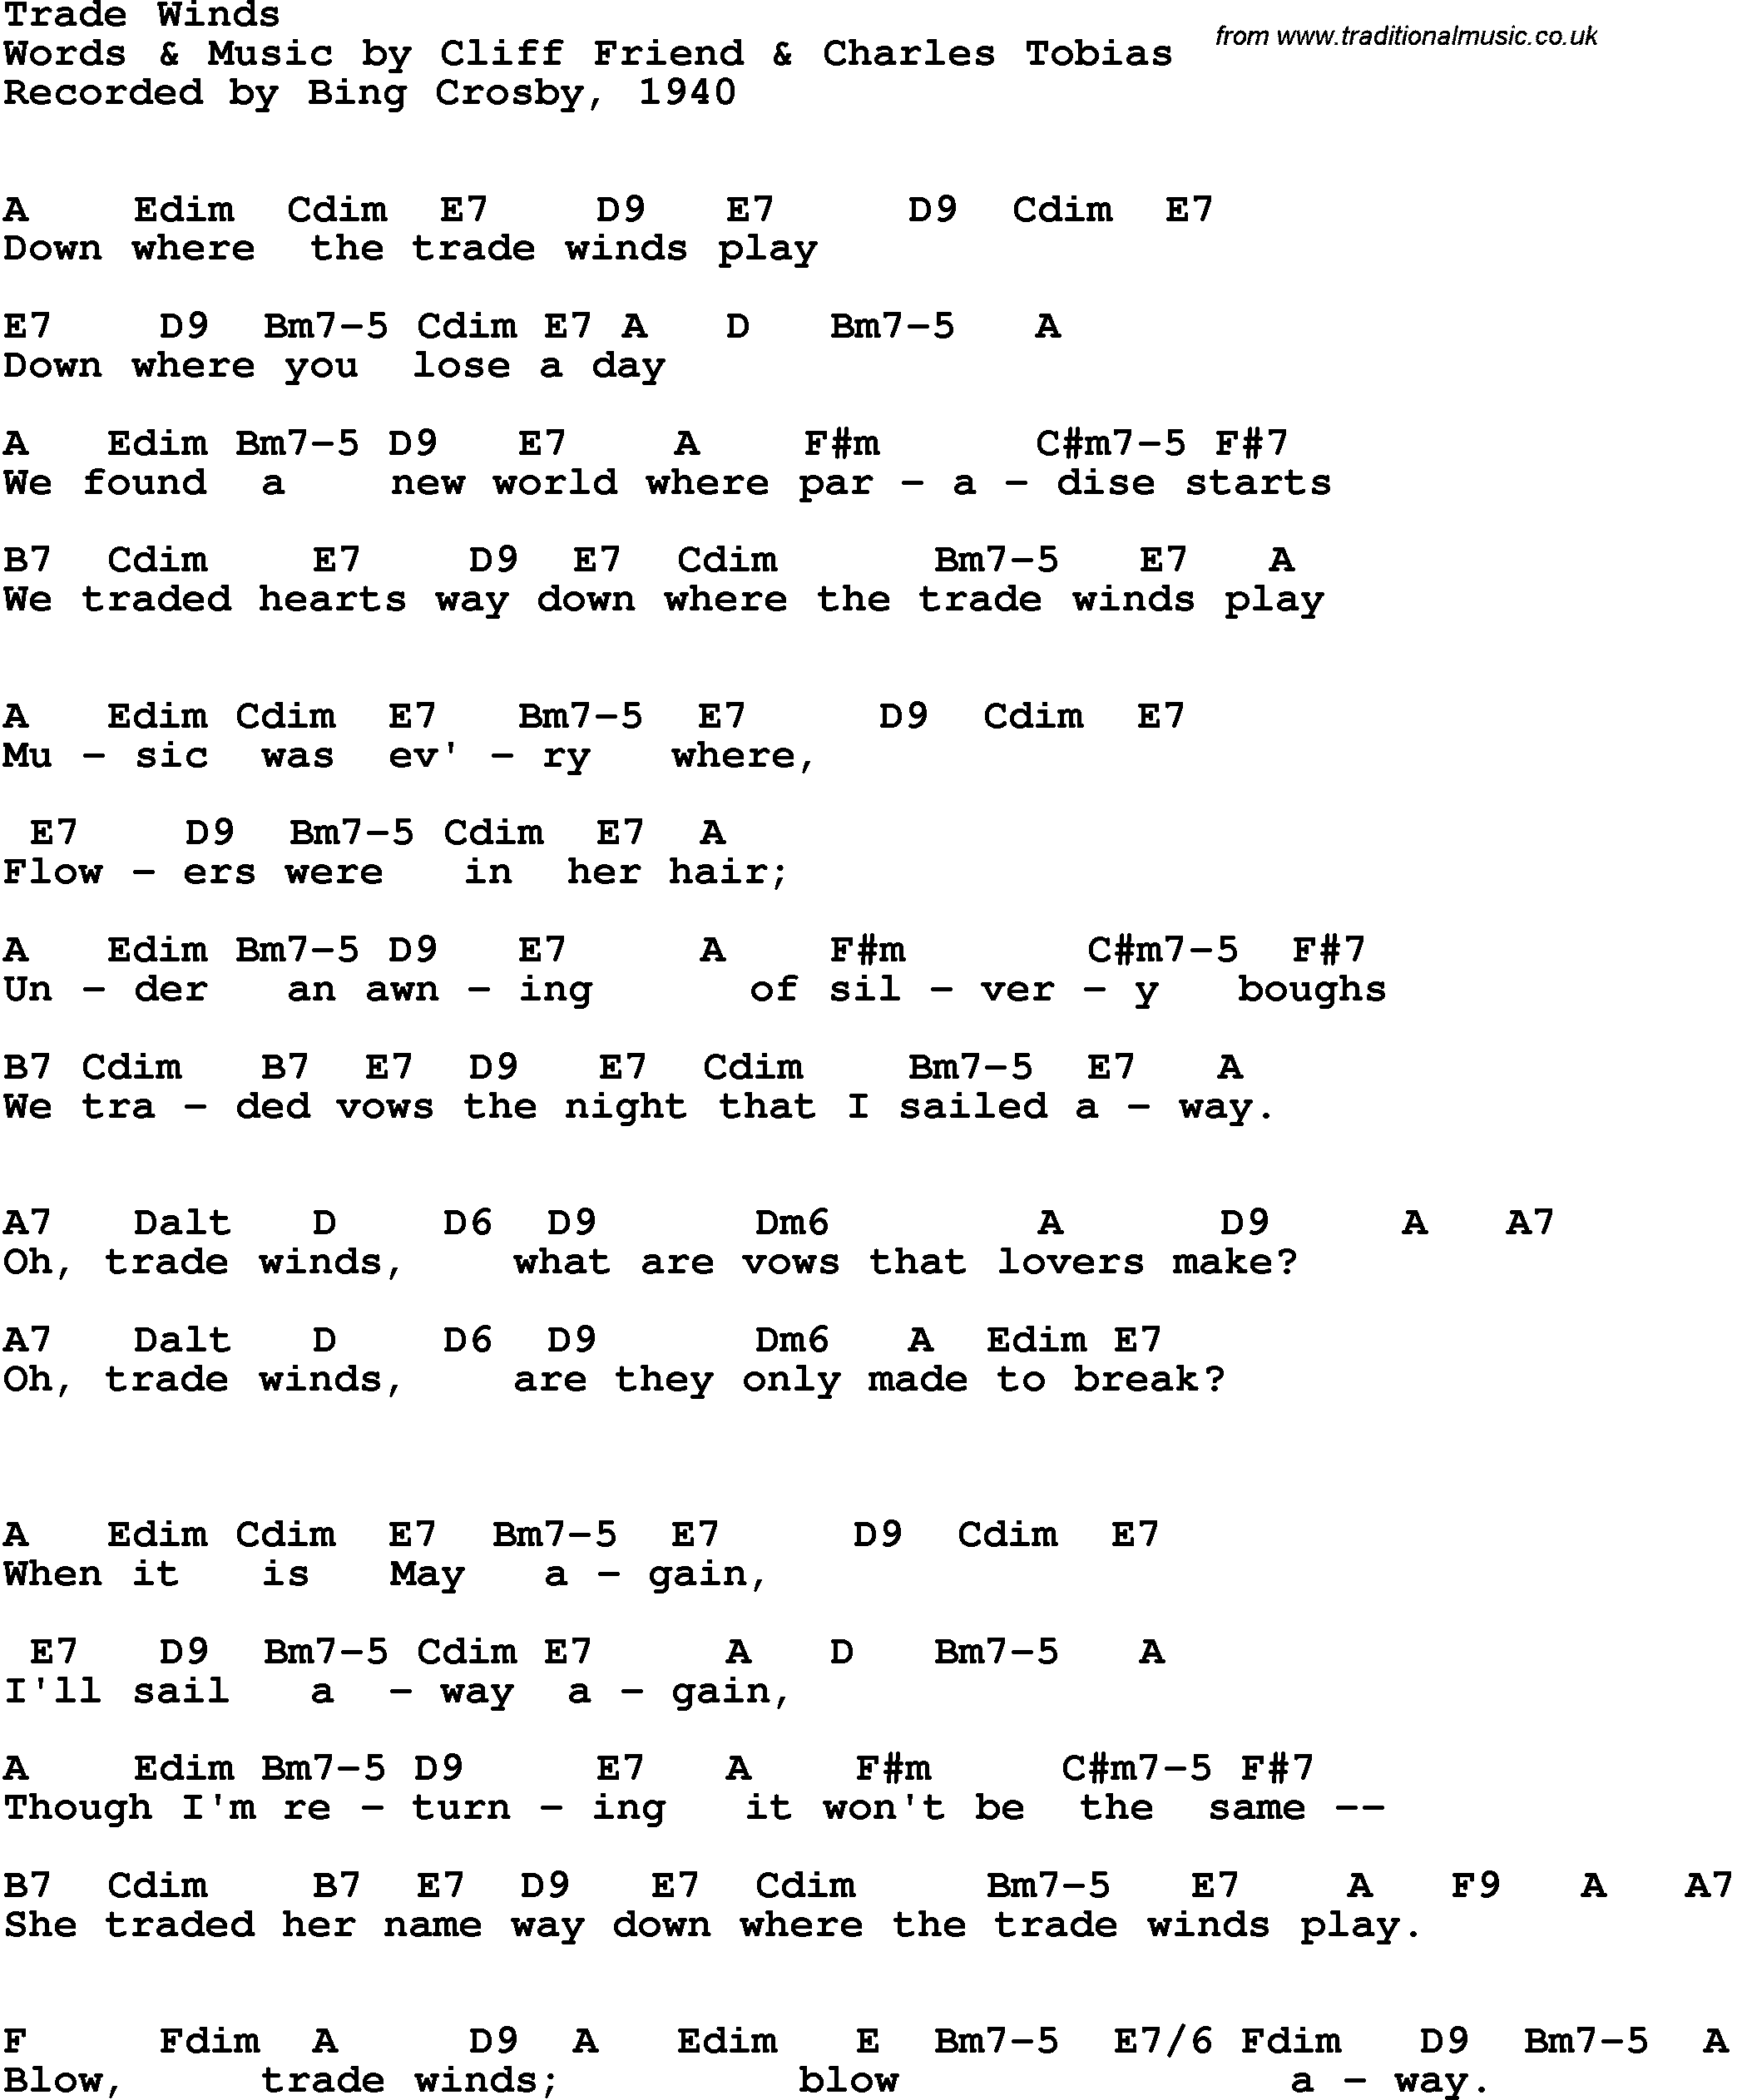 Song Lyrics with guitar chords for Trade Winds - Bing Crosby, 1950